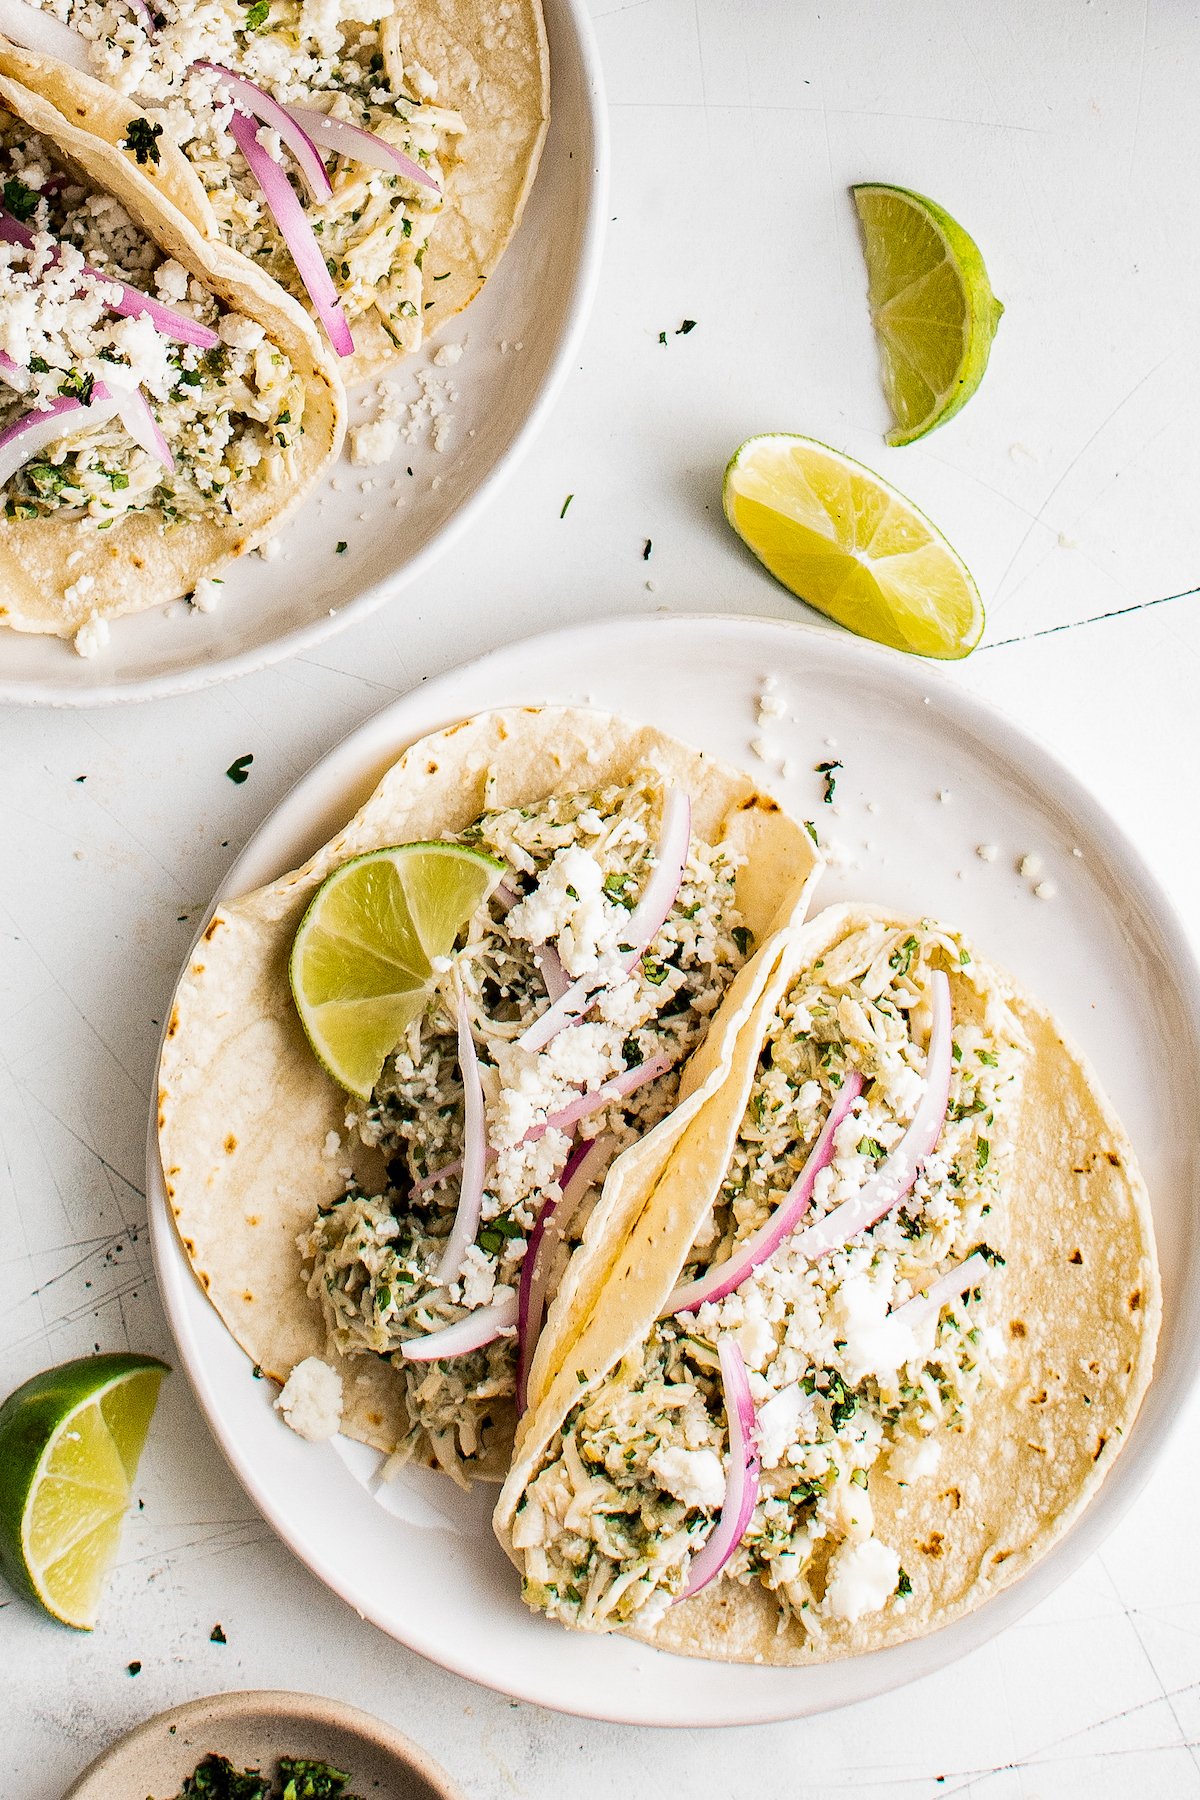 Chicken tacos on plates, garnished with lime and cotija cheese.